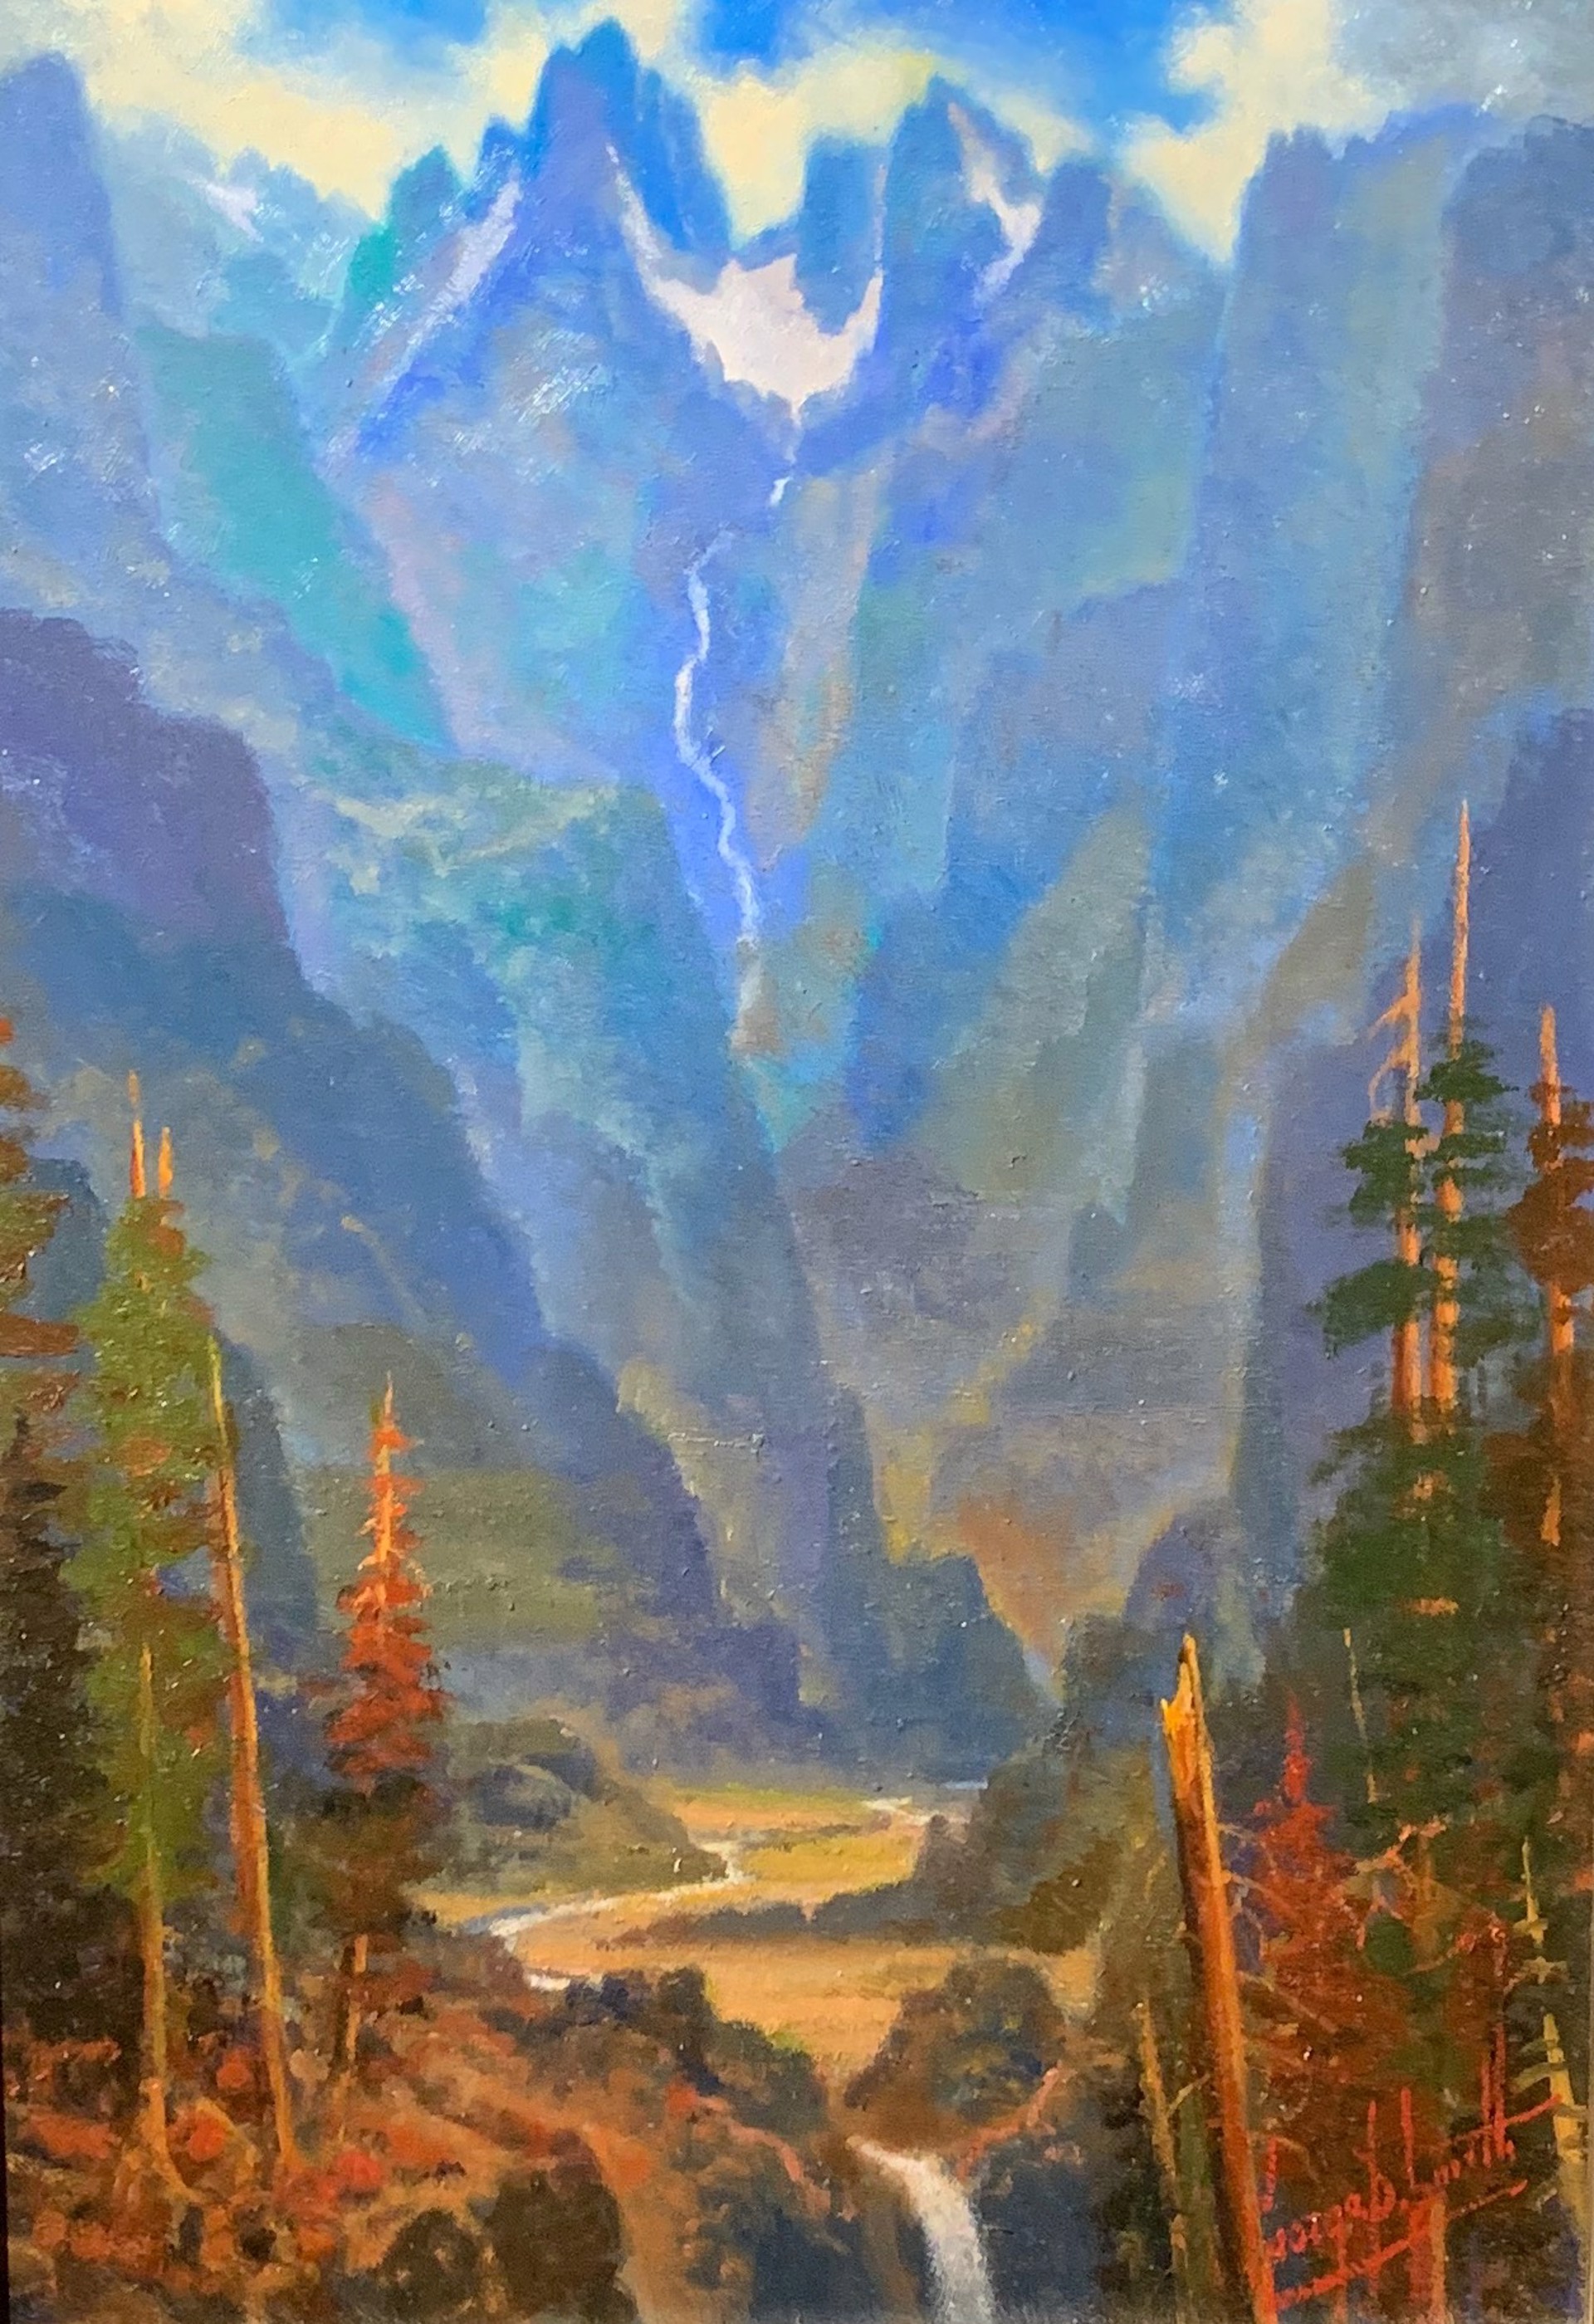 HEADWATERS OF THE SHOSHONE by George "Dee" Smith